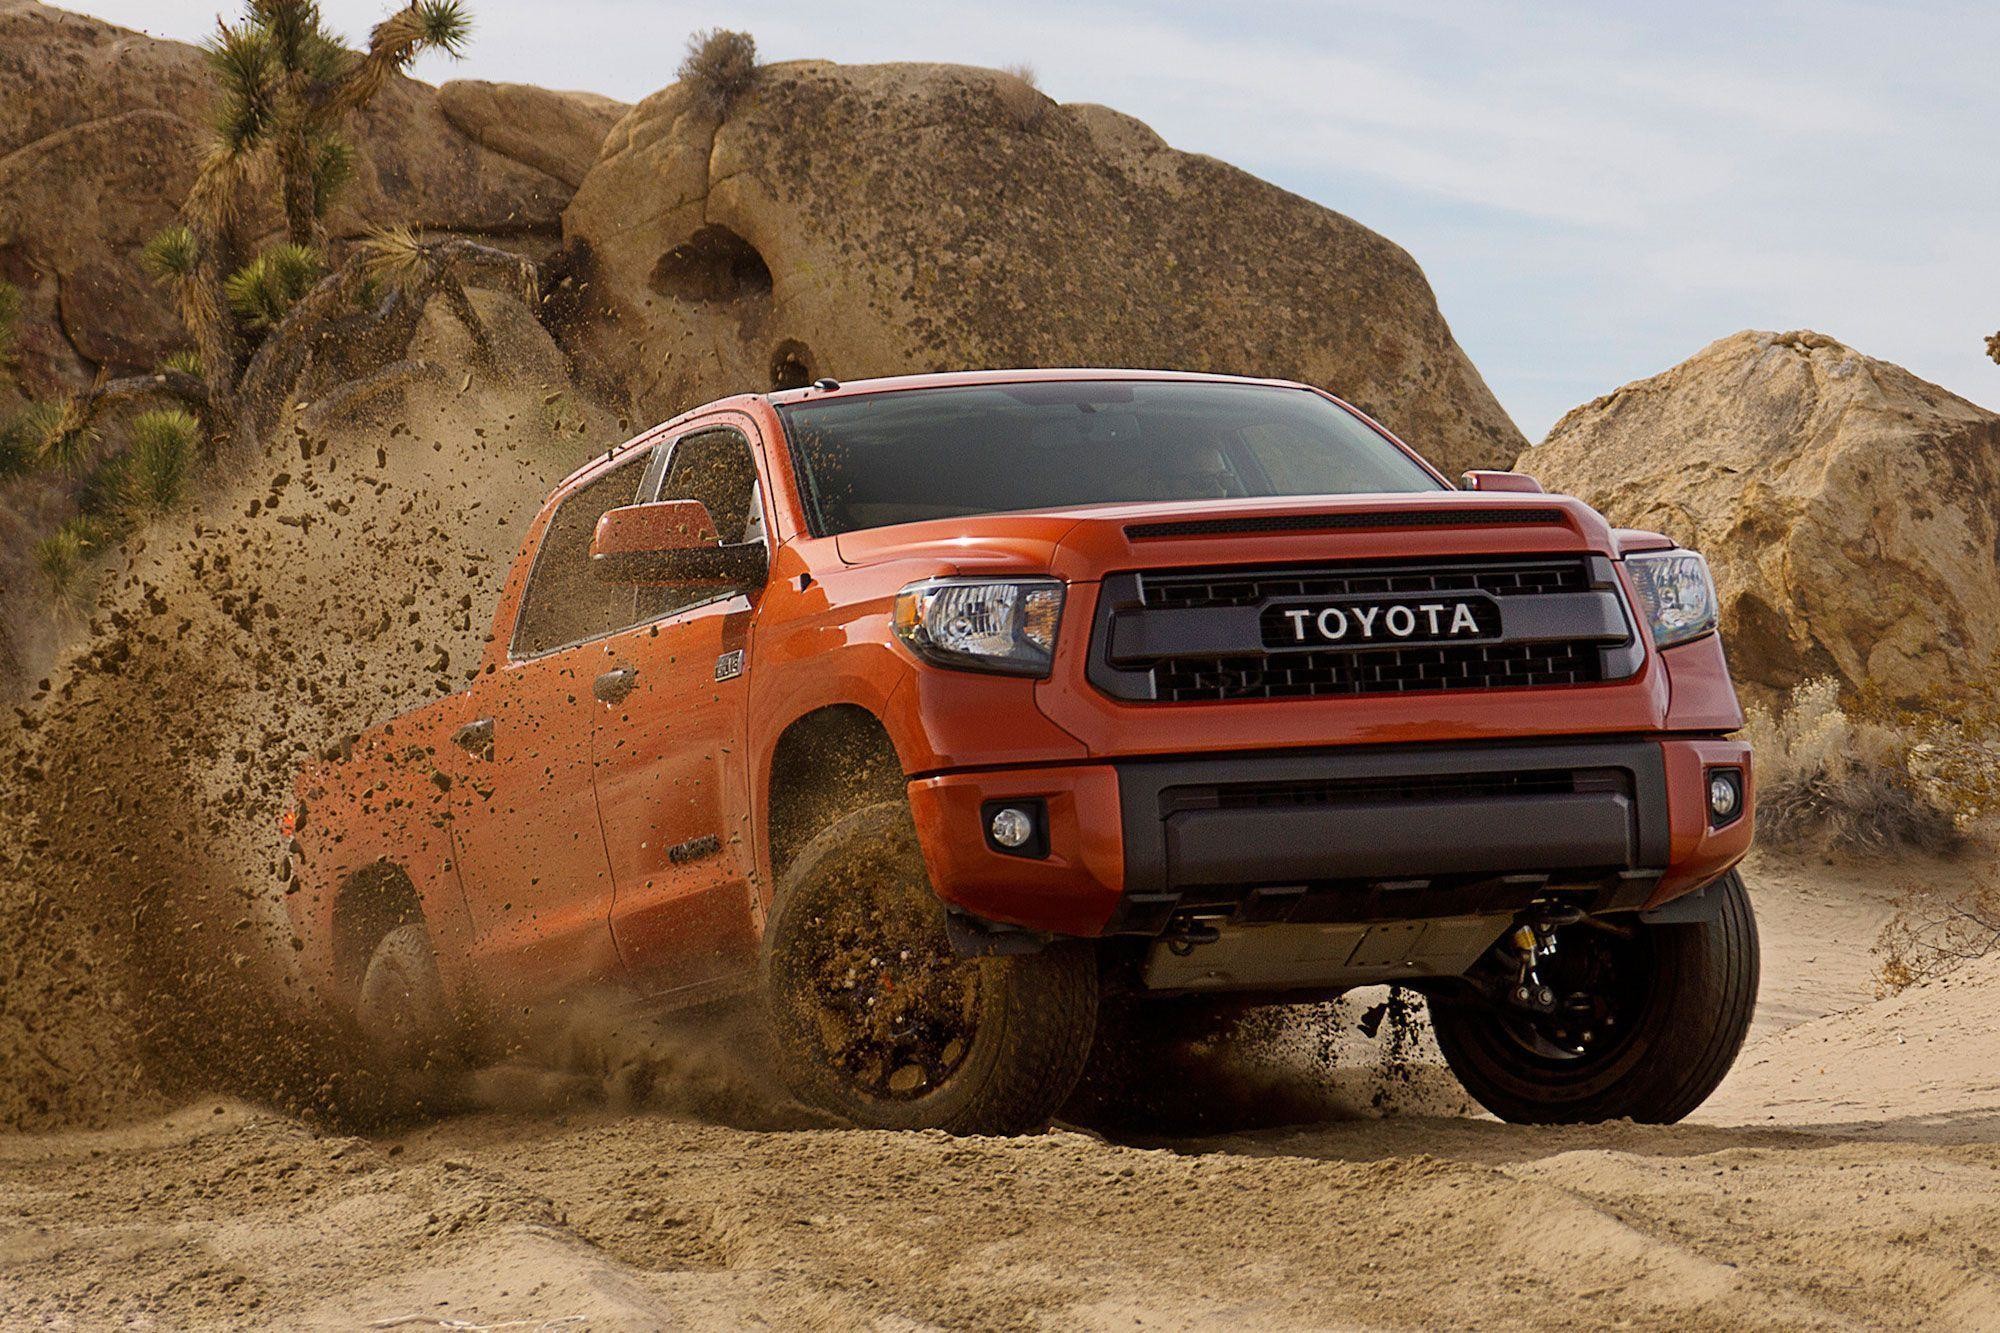 2000x1333 2015 Toyota Tundra TRD Pro Series Wallpaper Wide or HD | Cars .